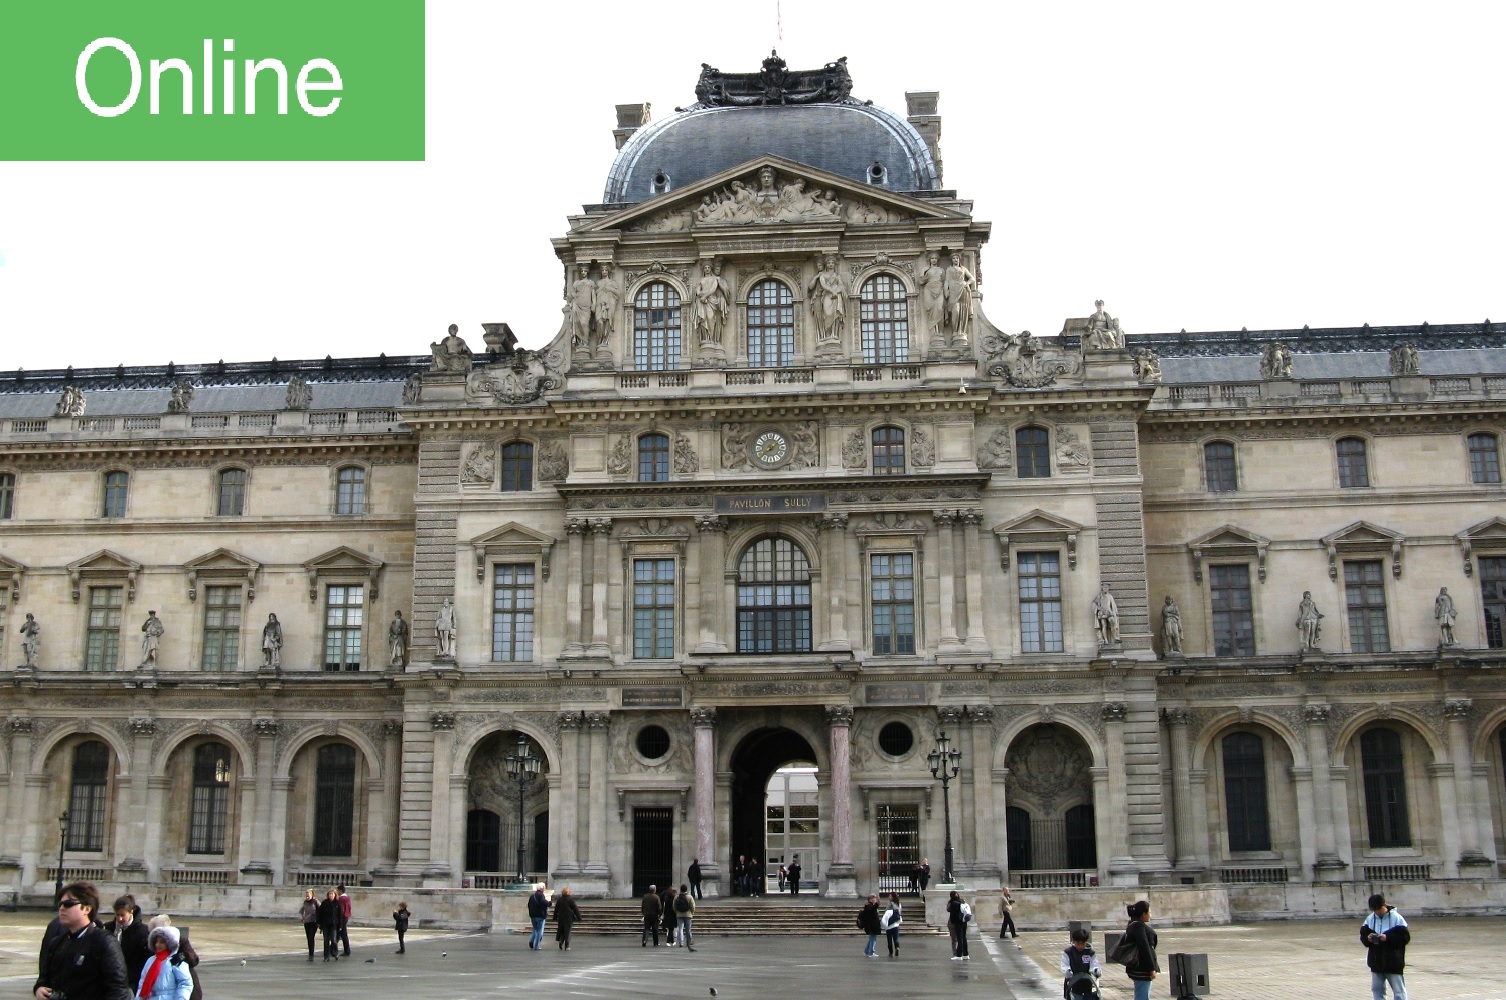 Online visit to the Louvre Museum